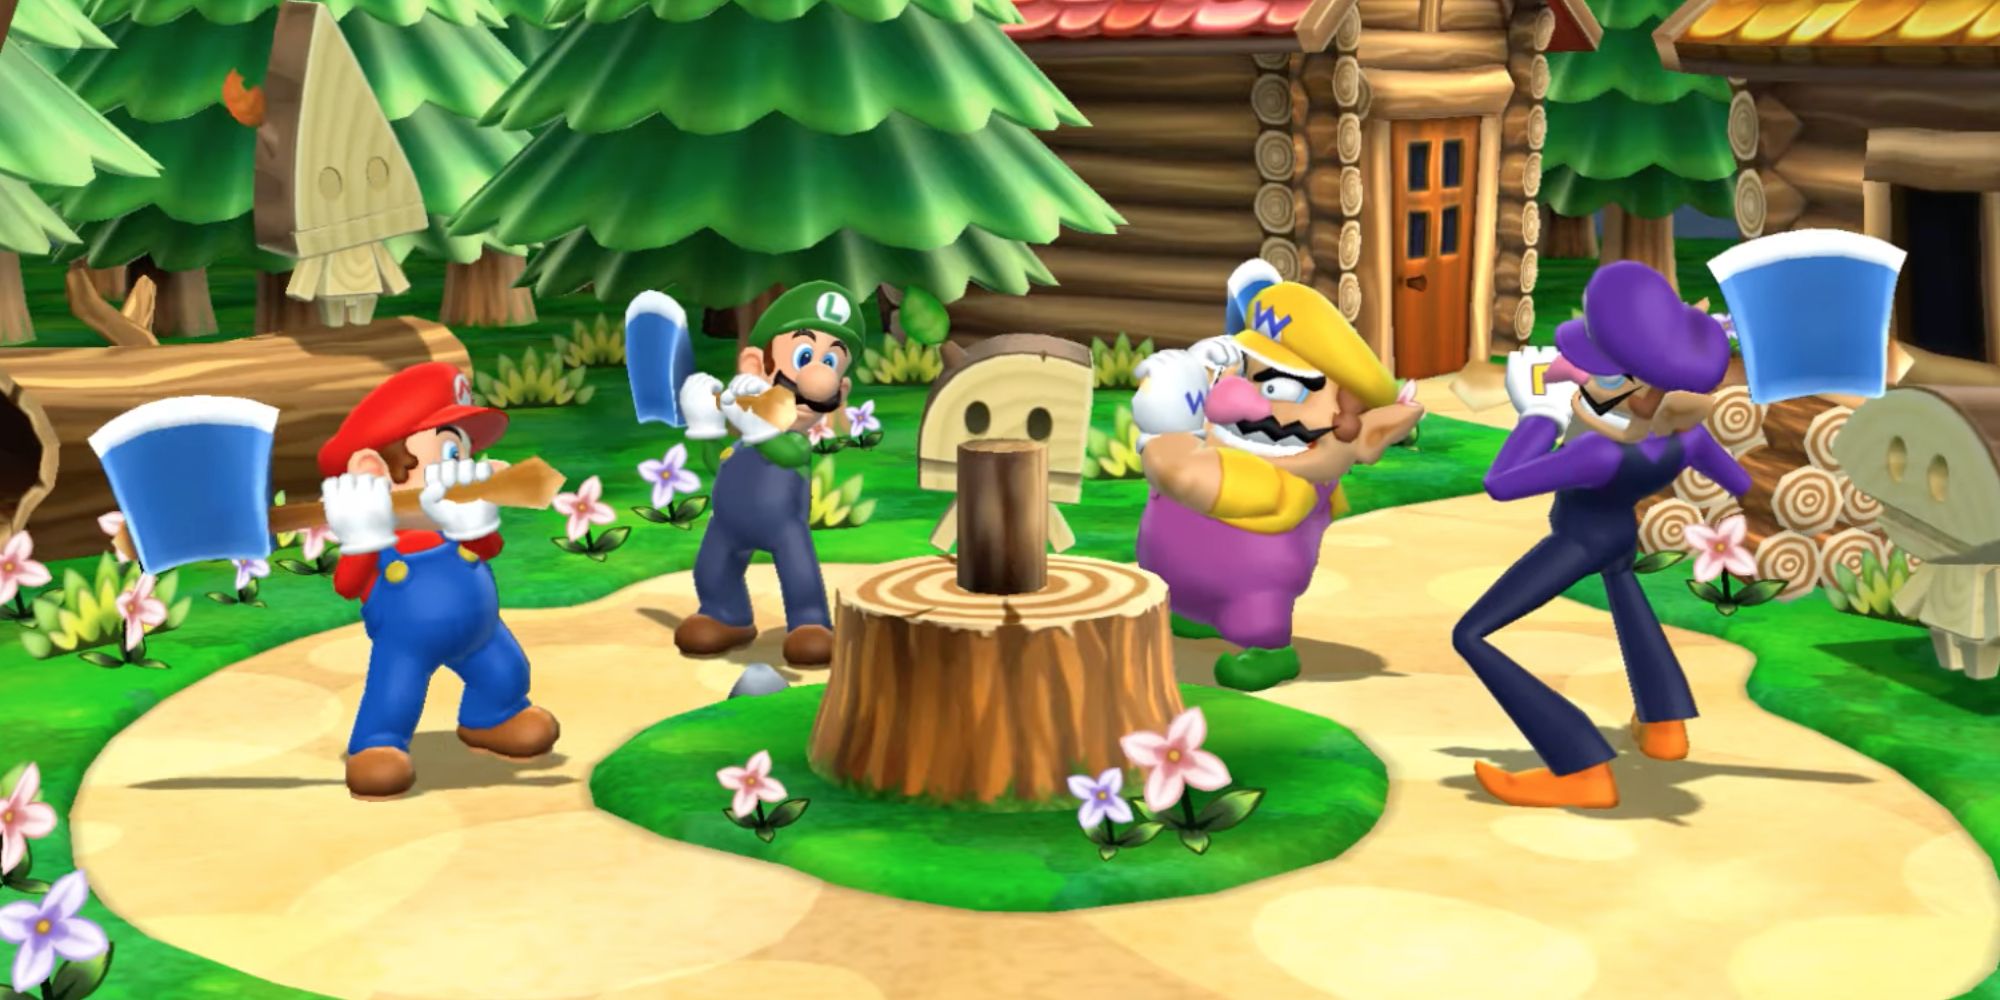 Lumberjack Heads from Mario Party 9 and Mario Party: The Top 100